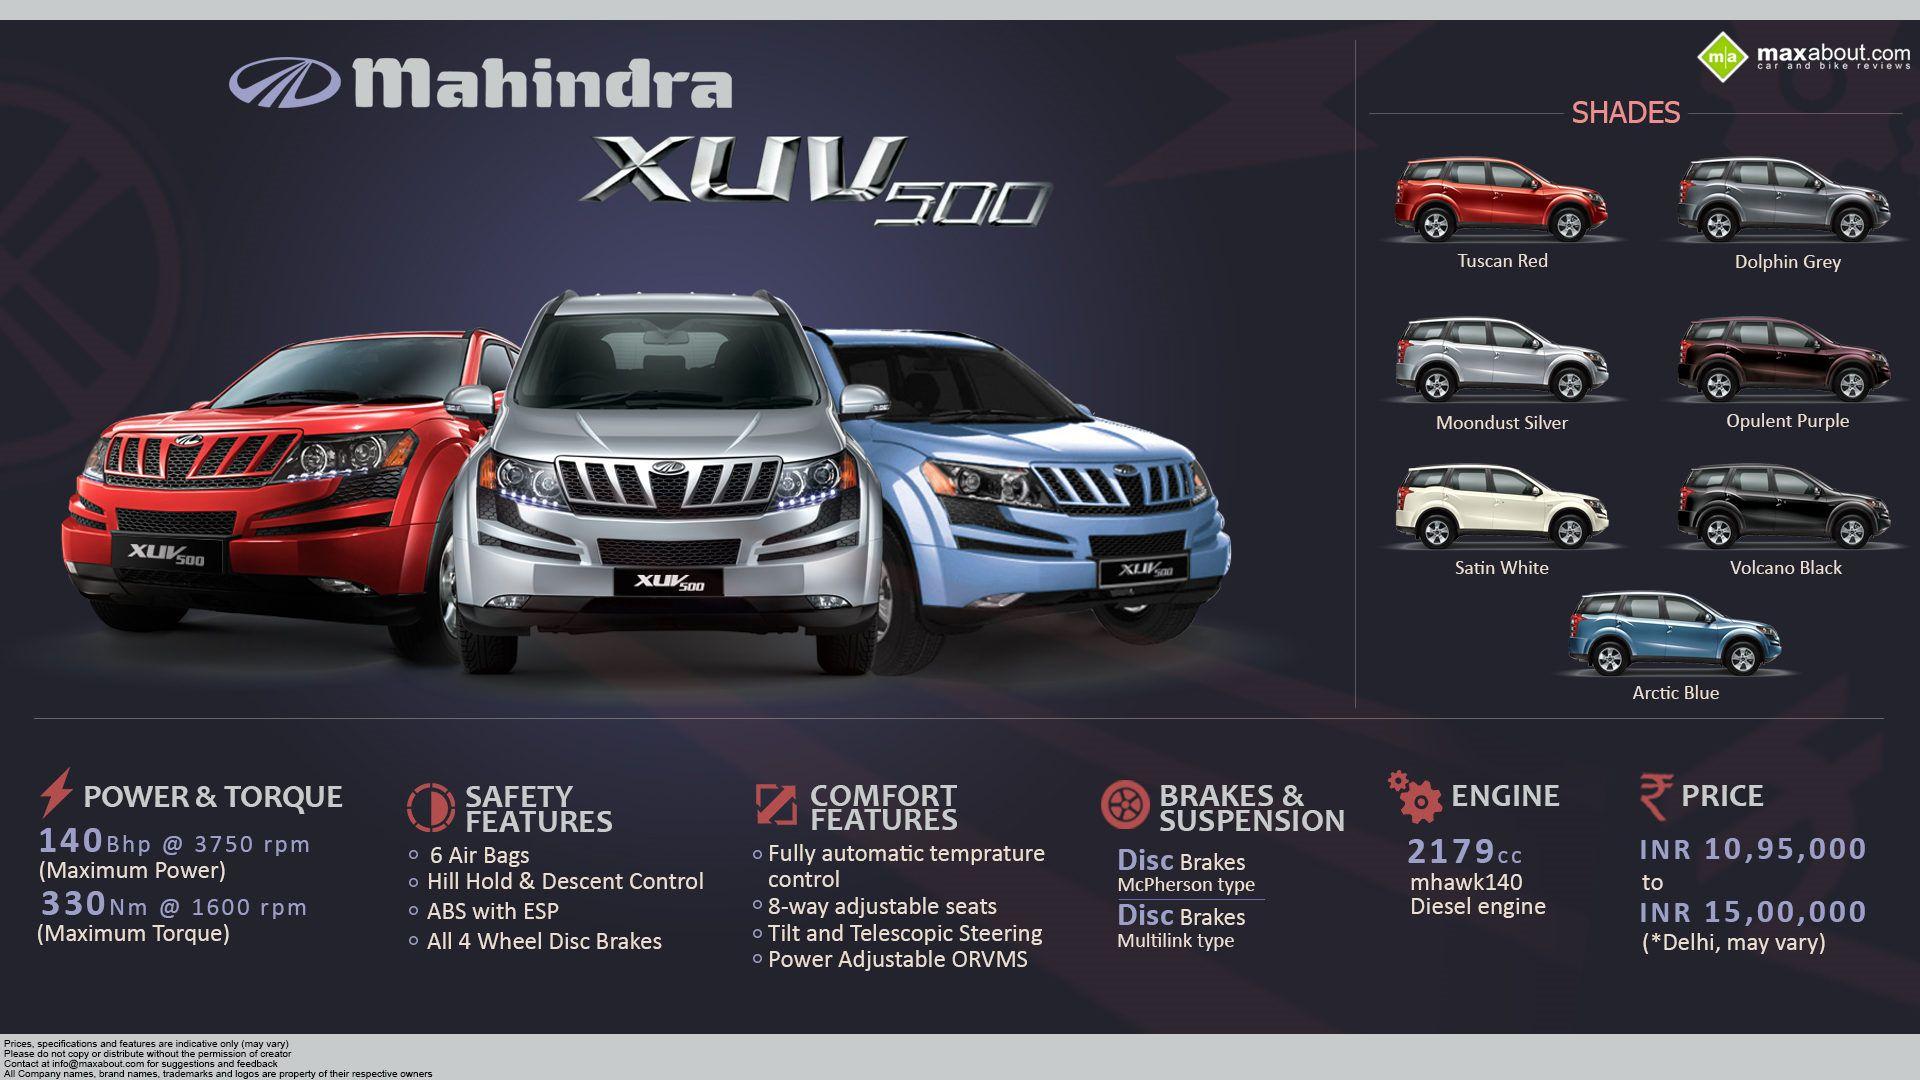 All You Need to Know about the Mahindra XUV500